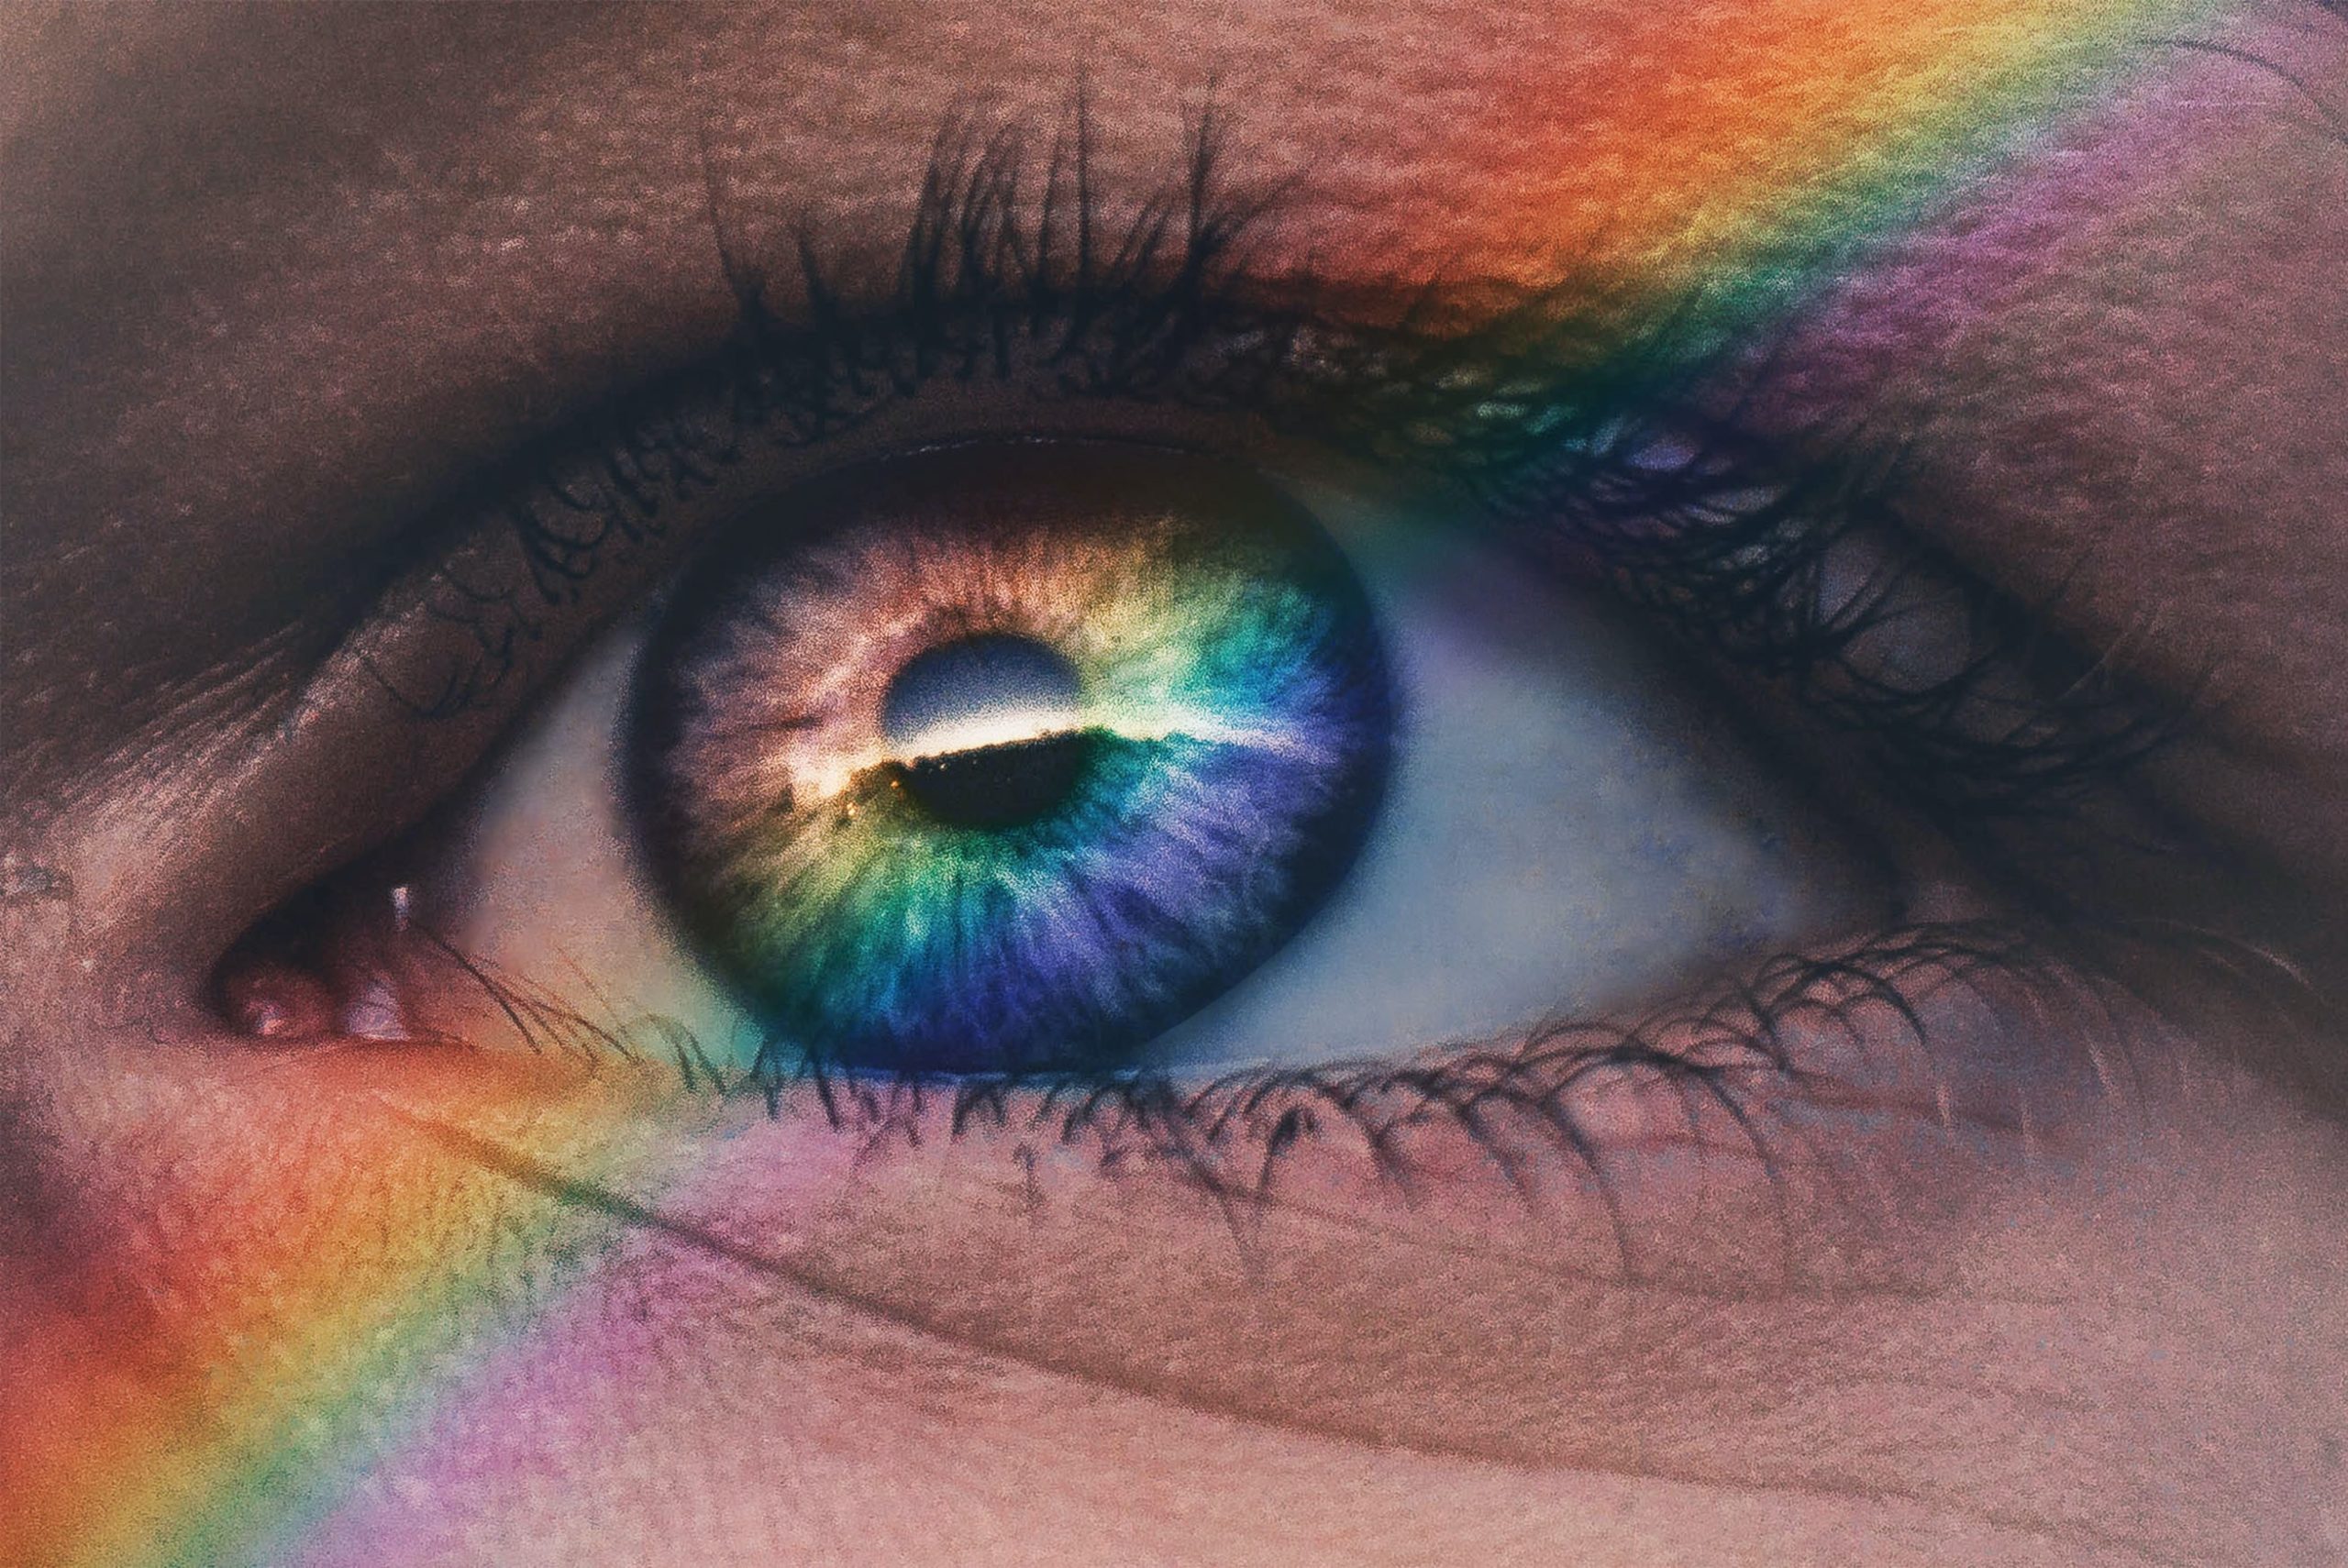 A close up images of an eye with a rainbow over it